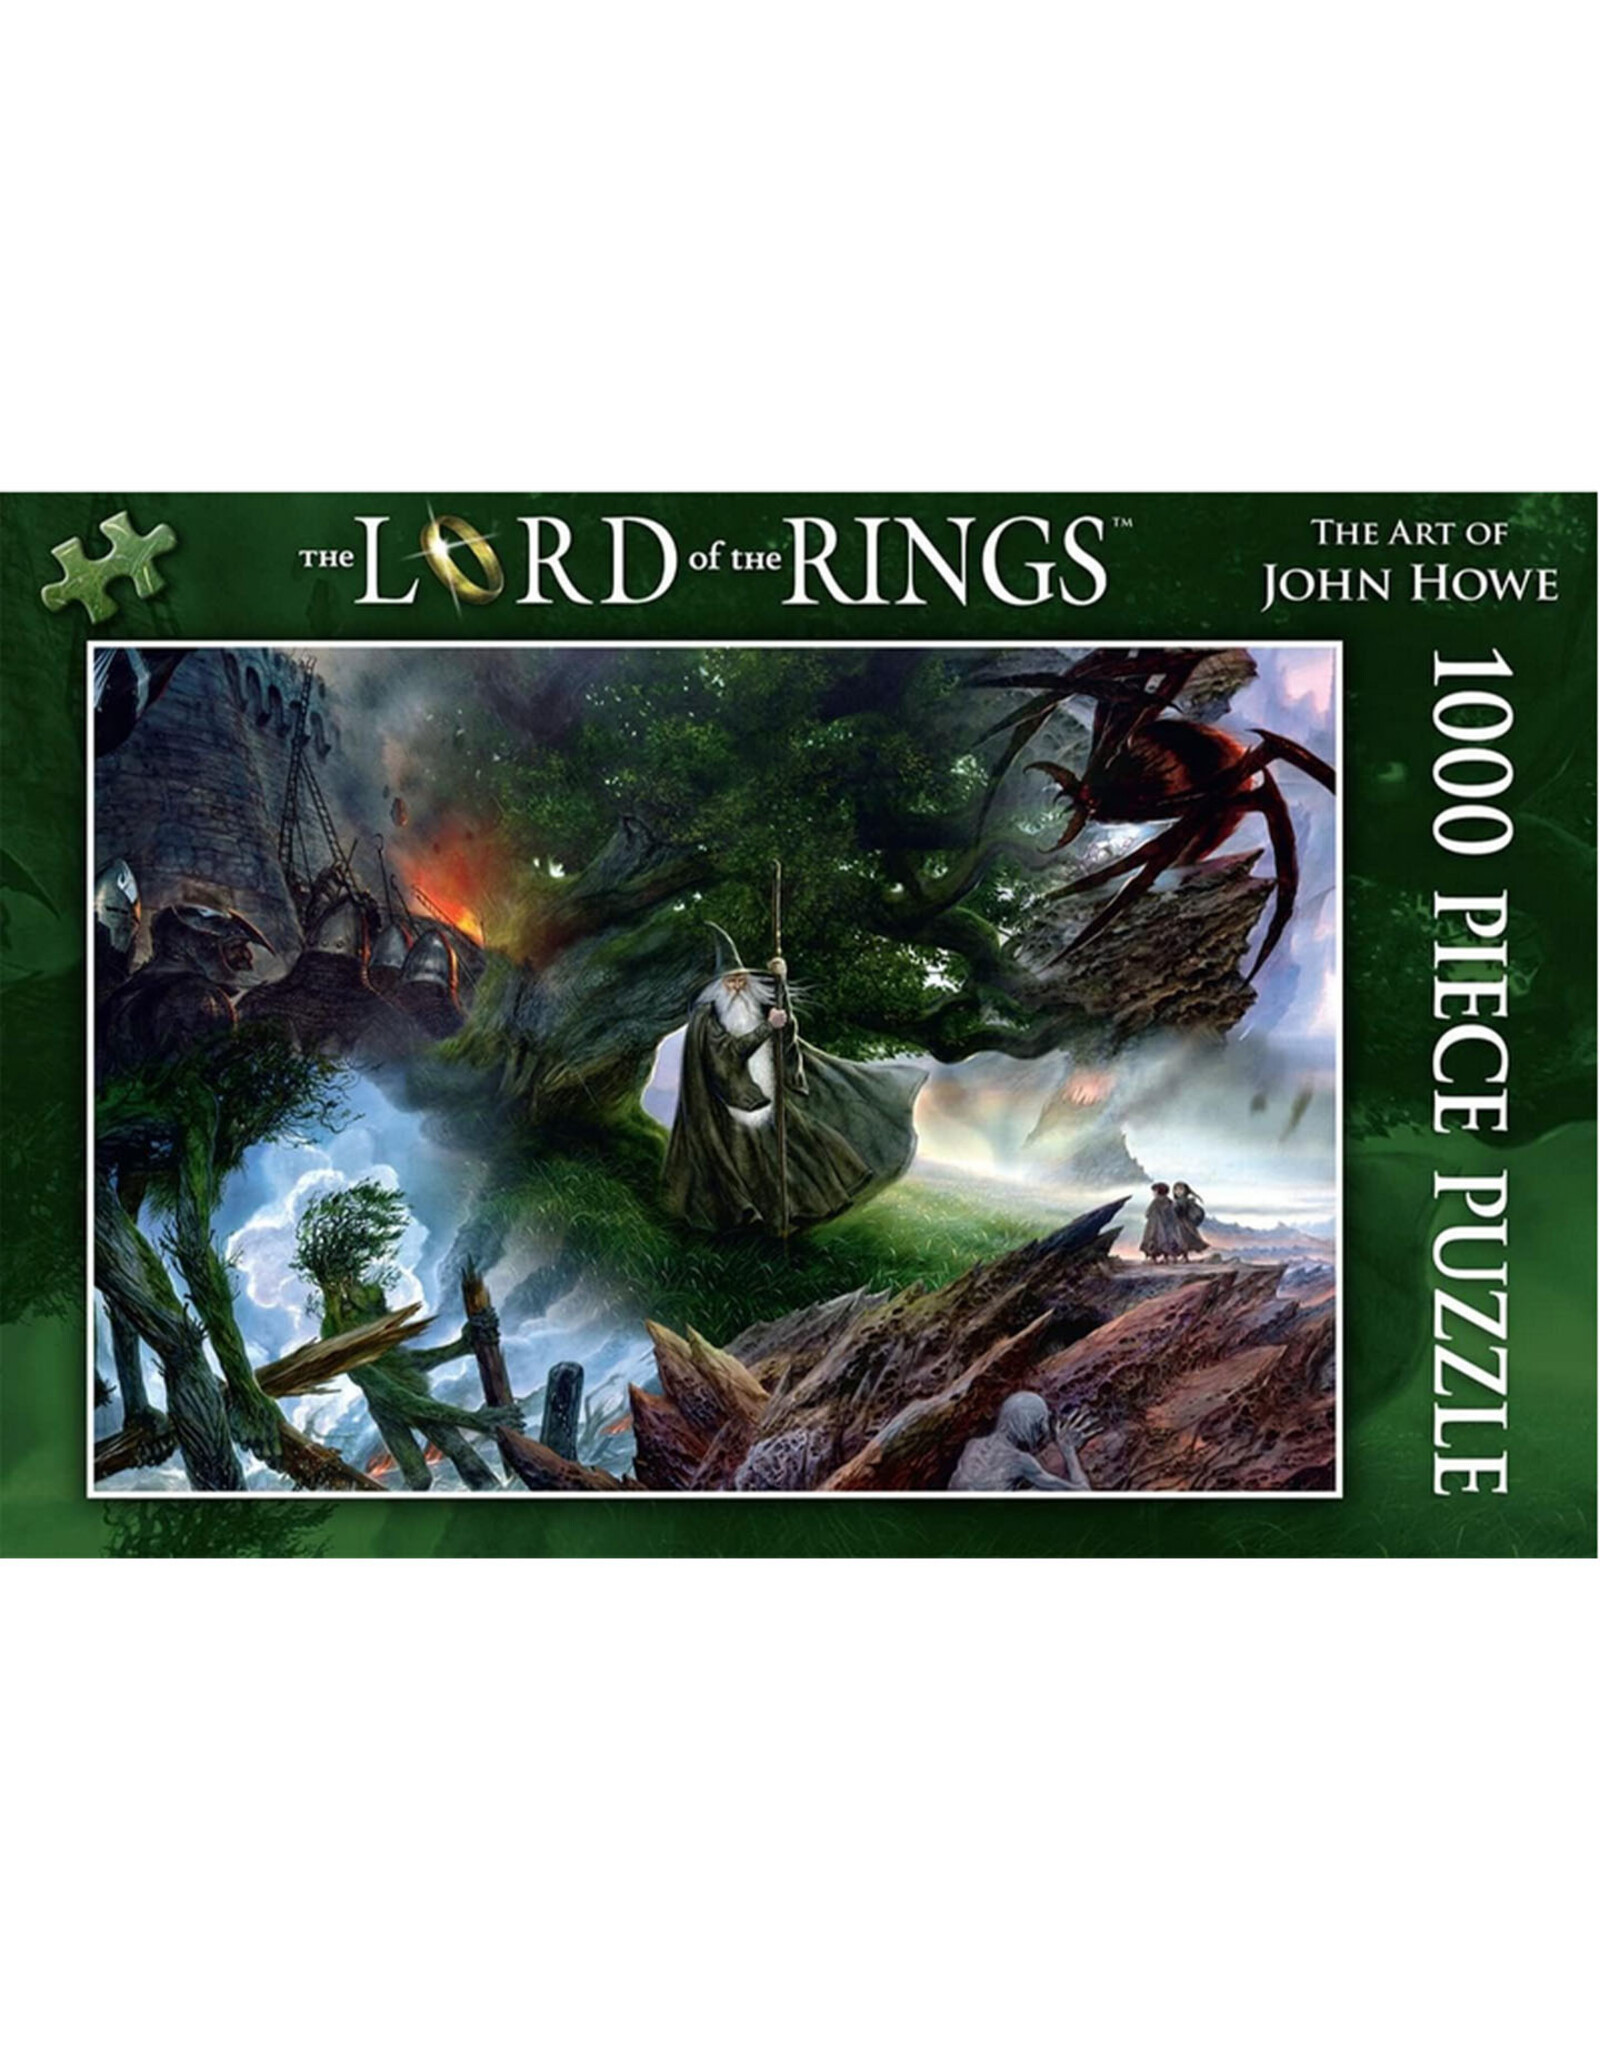 The Lord of The Rings 1000 Piece Jigsaw Puzzle: The Art of John Howe